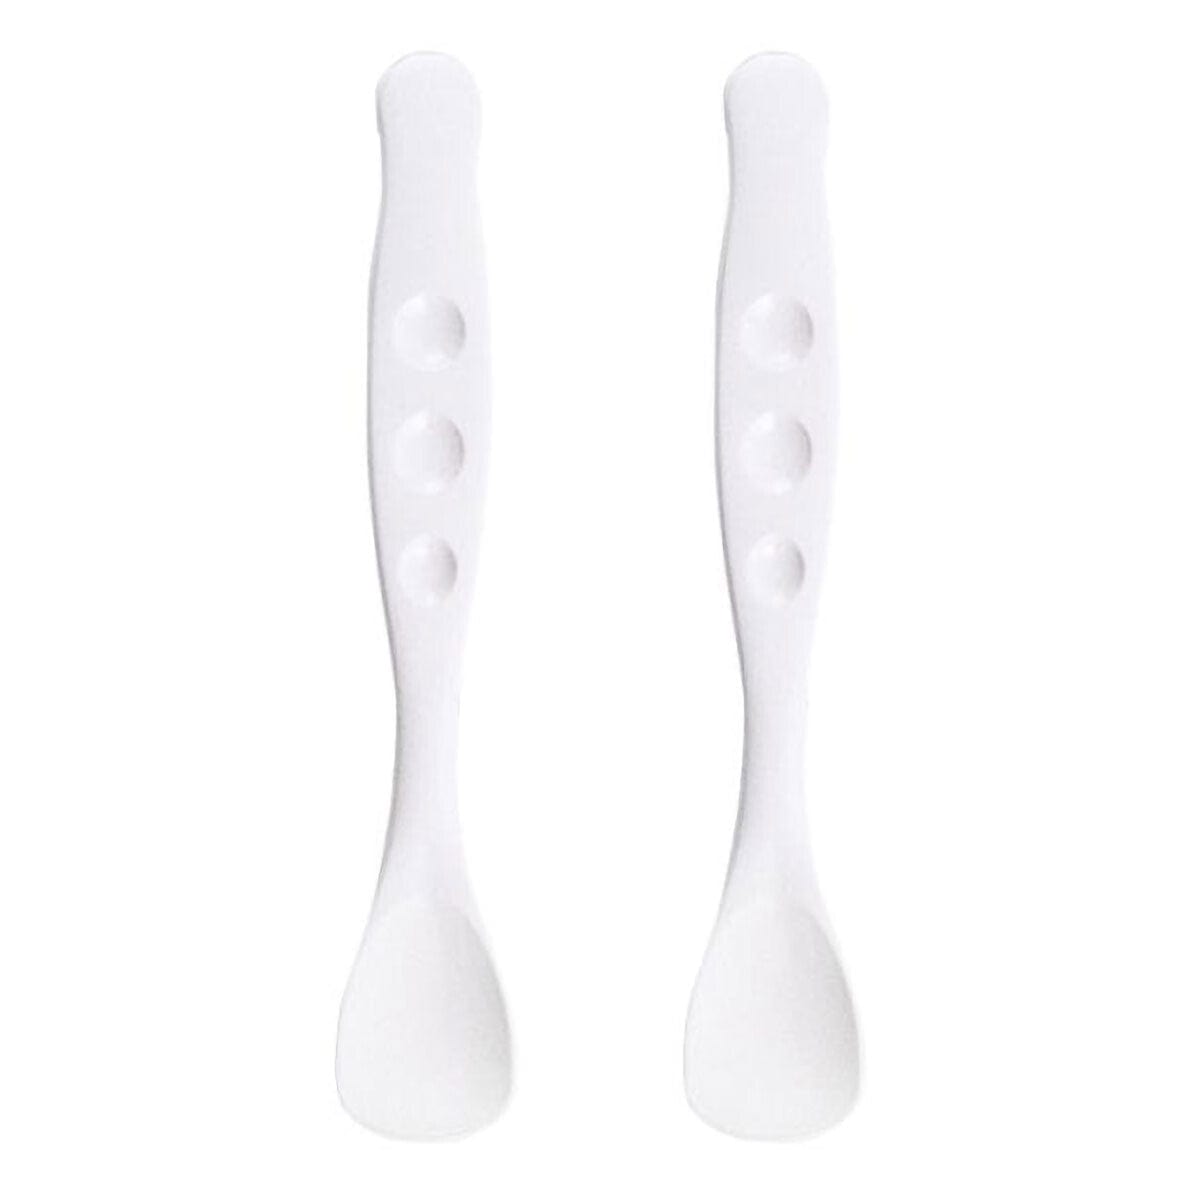 Richell - You Can Use It Baby Soft Spoon 2 Pieces    Baby Spoon